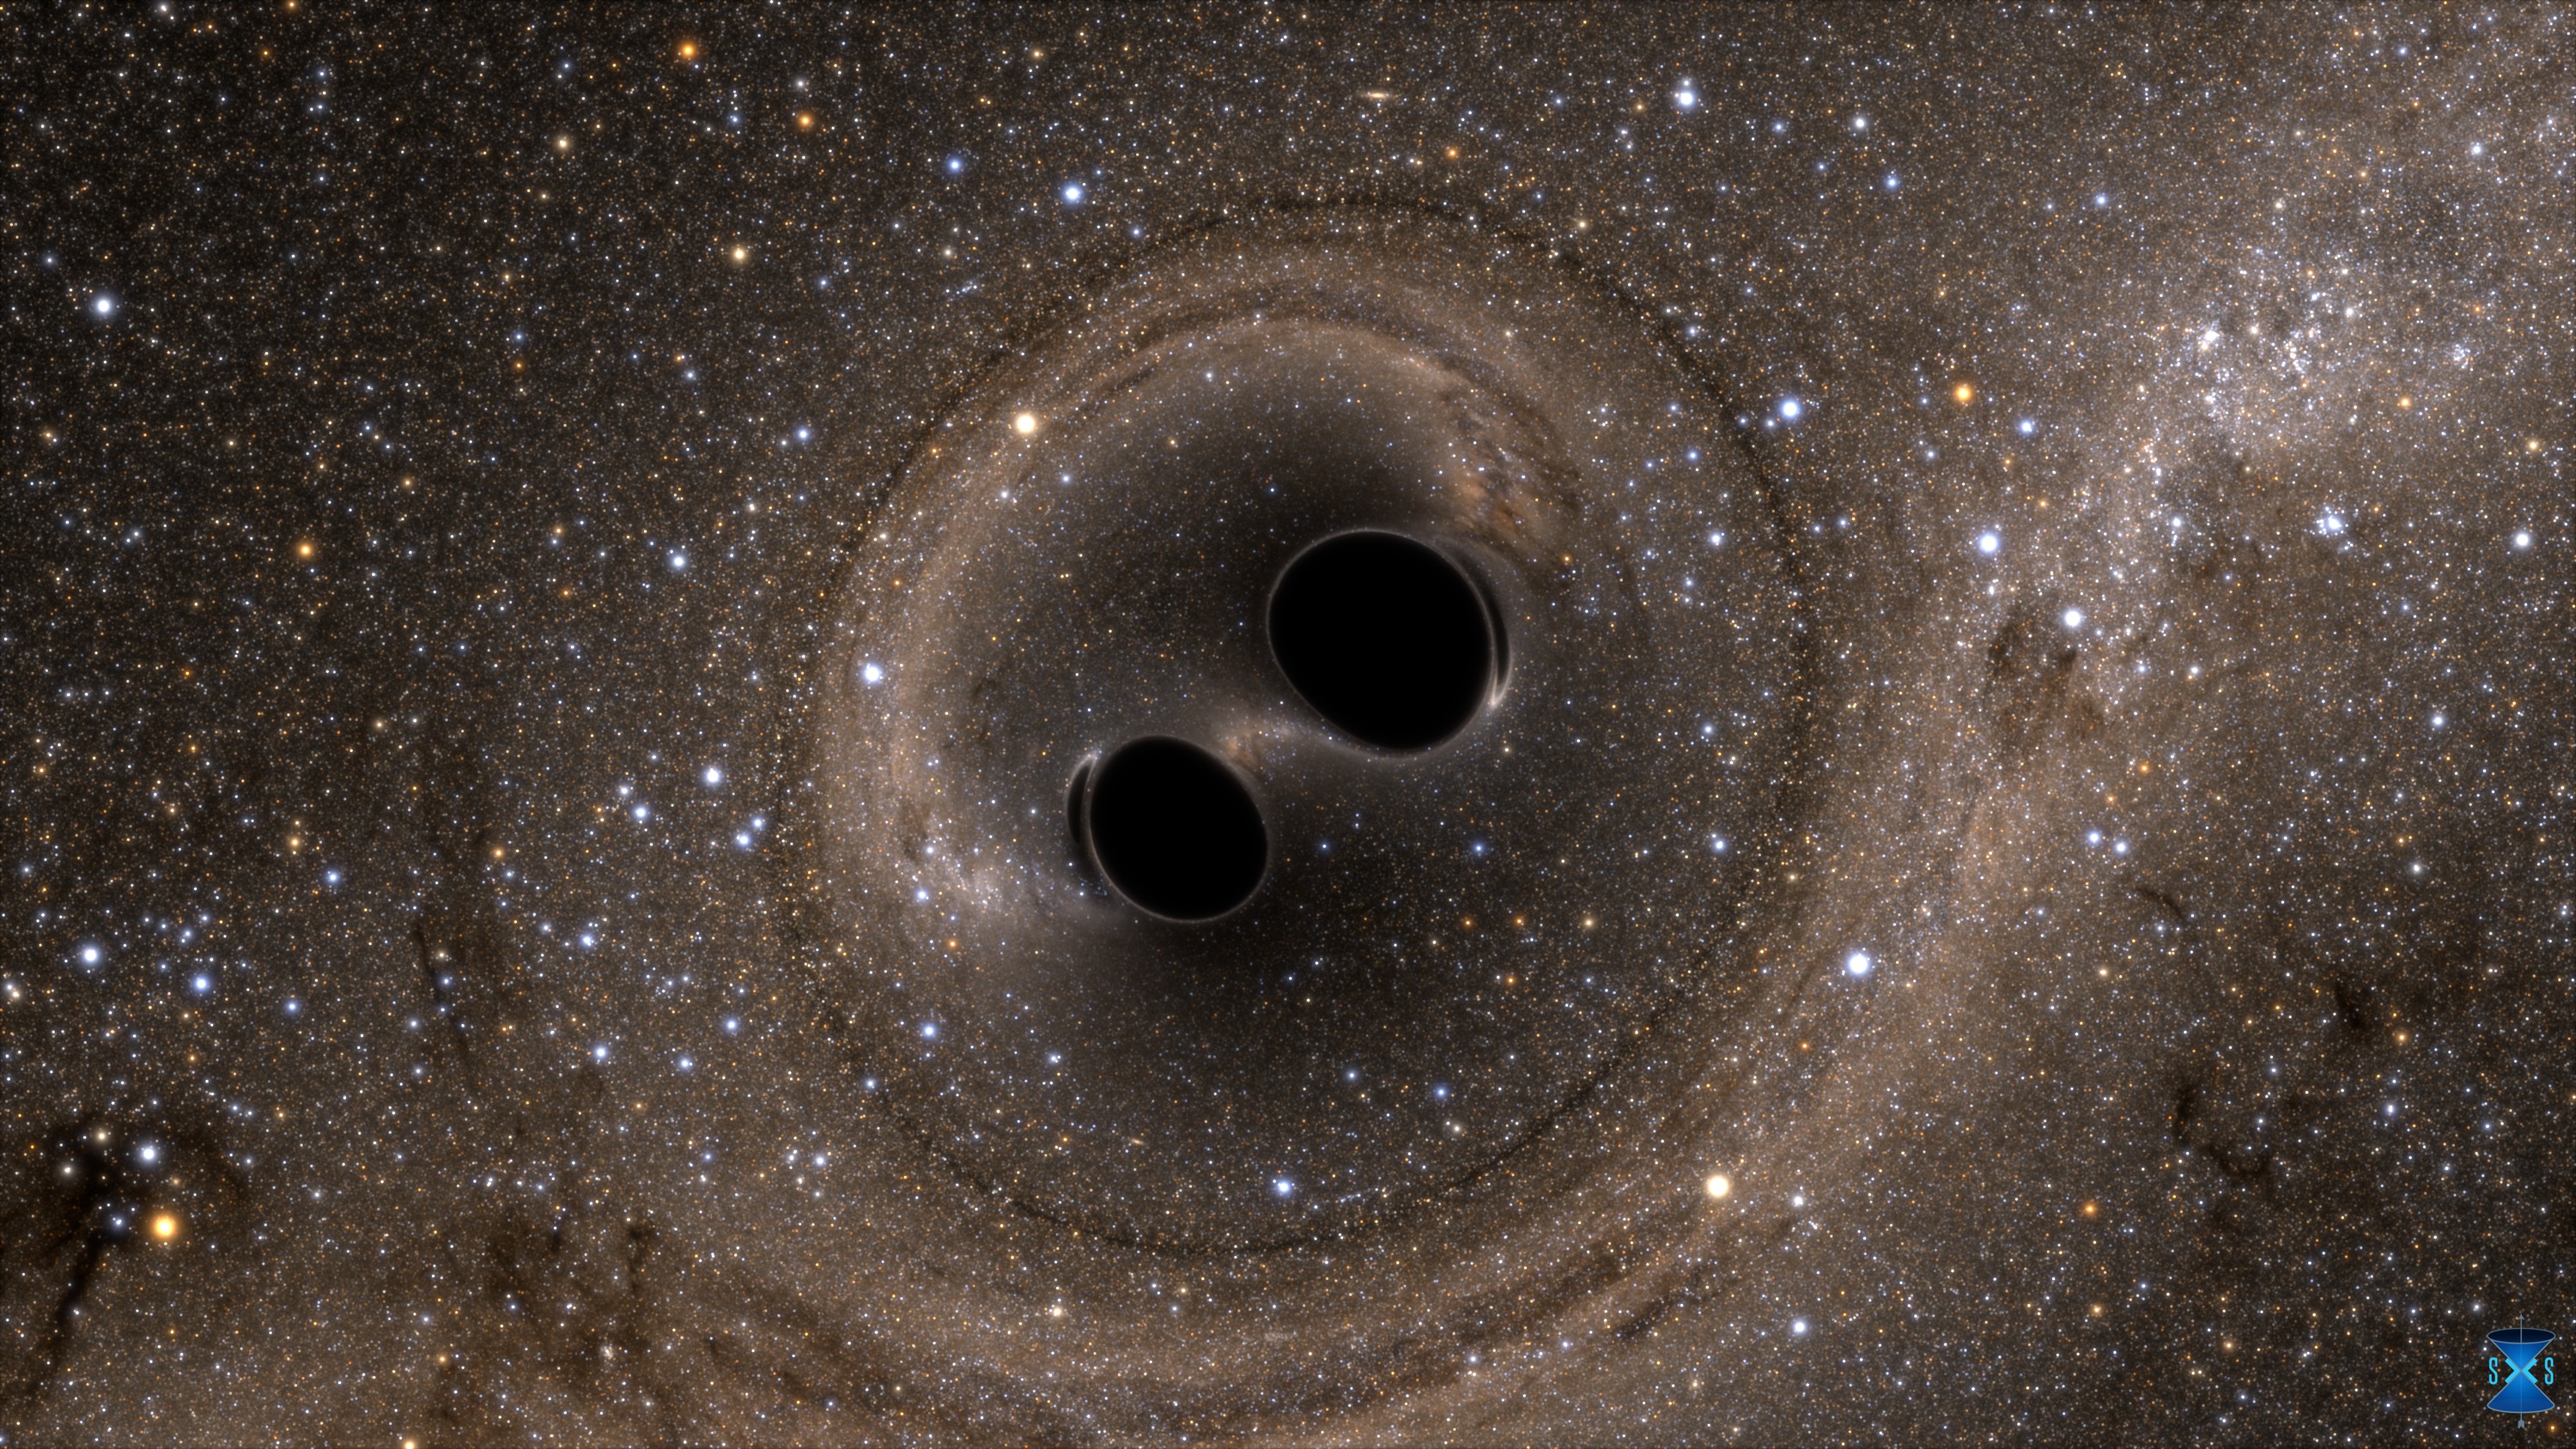 The collision of two black holes holes—a tremendously powerful event detected for the first time ever by the Laser Interferometer Gravitational-Wave Observatory, or LIGO—is seen in this still from a computer simulation. Image Credit: SXS, the Simulating eXtreme Spacetimes (SXS) project